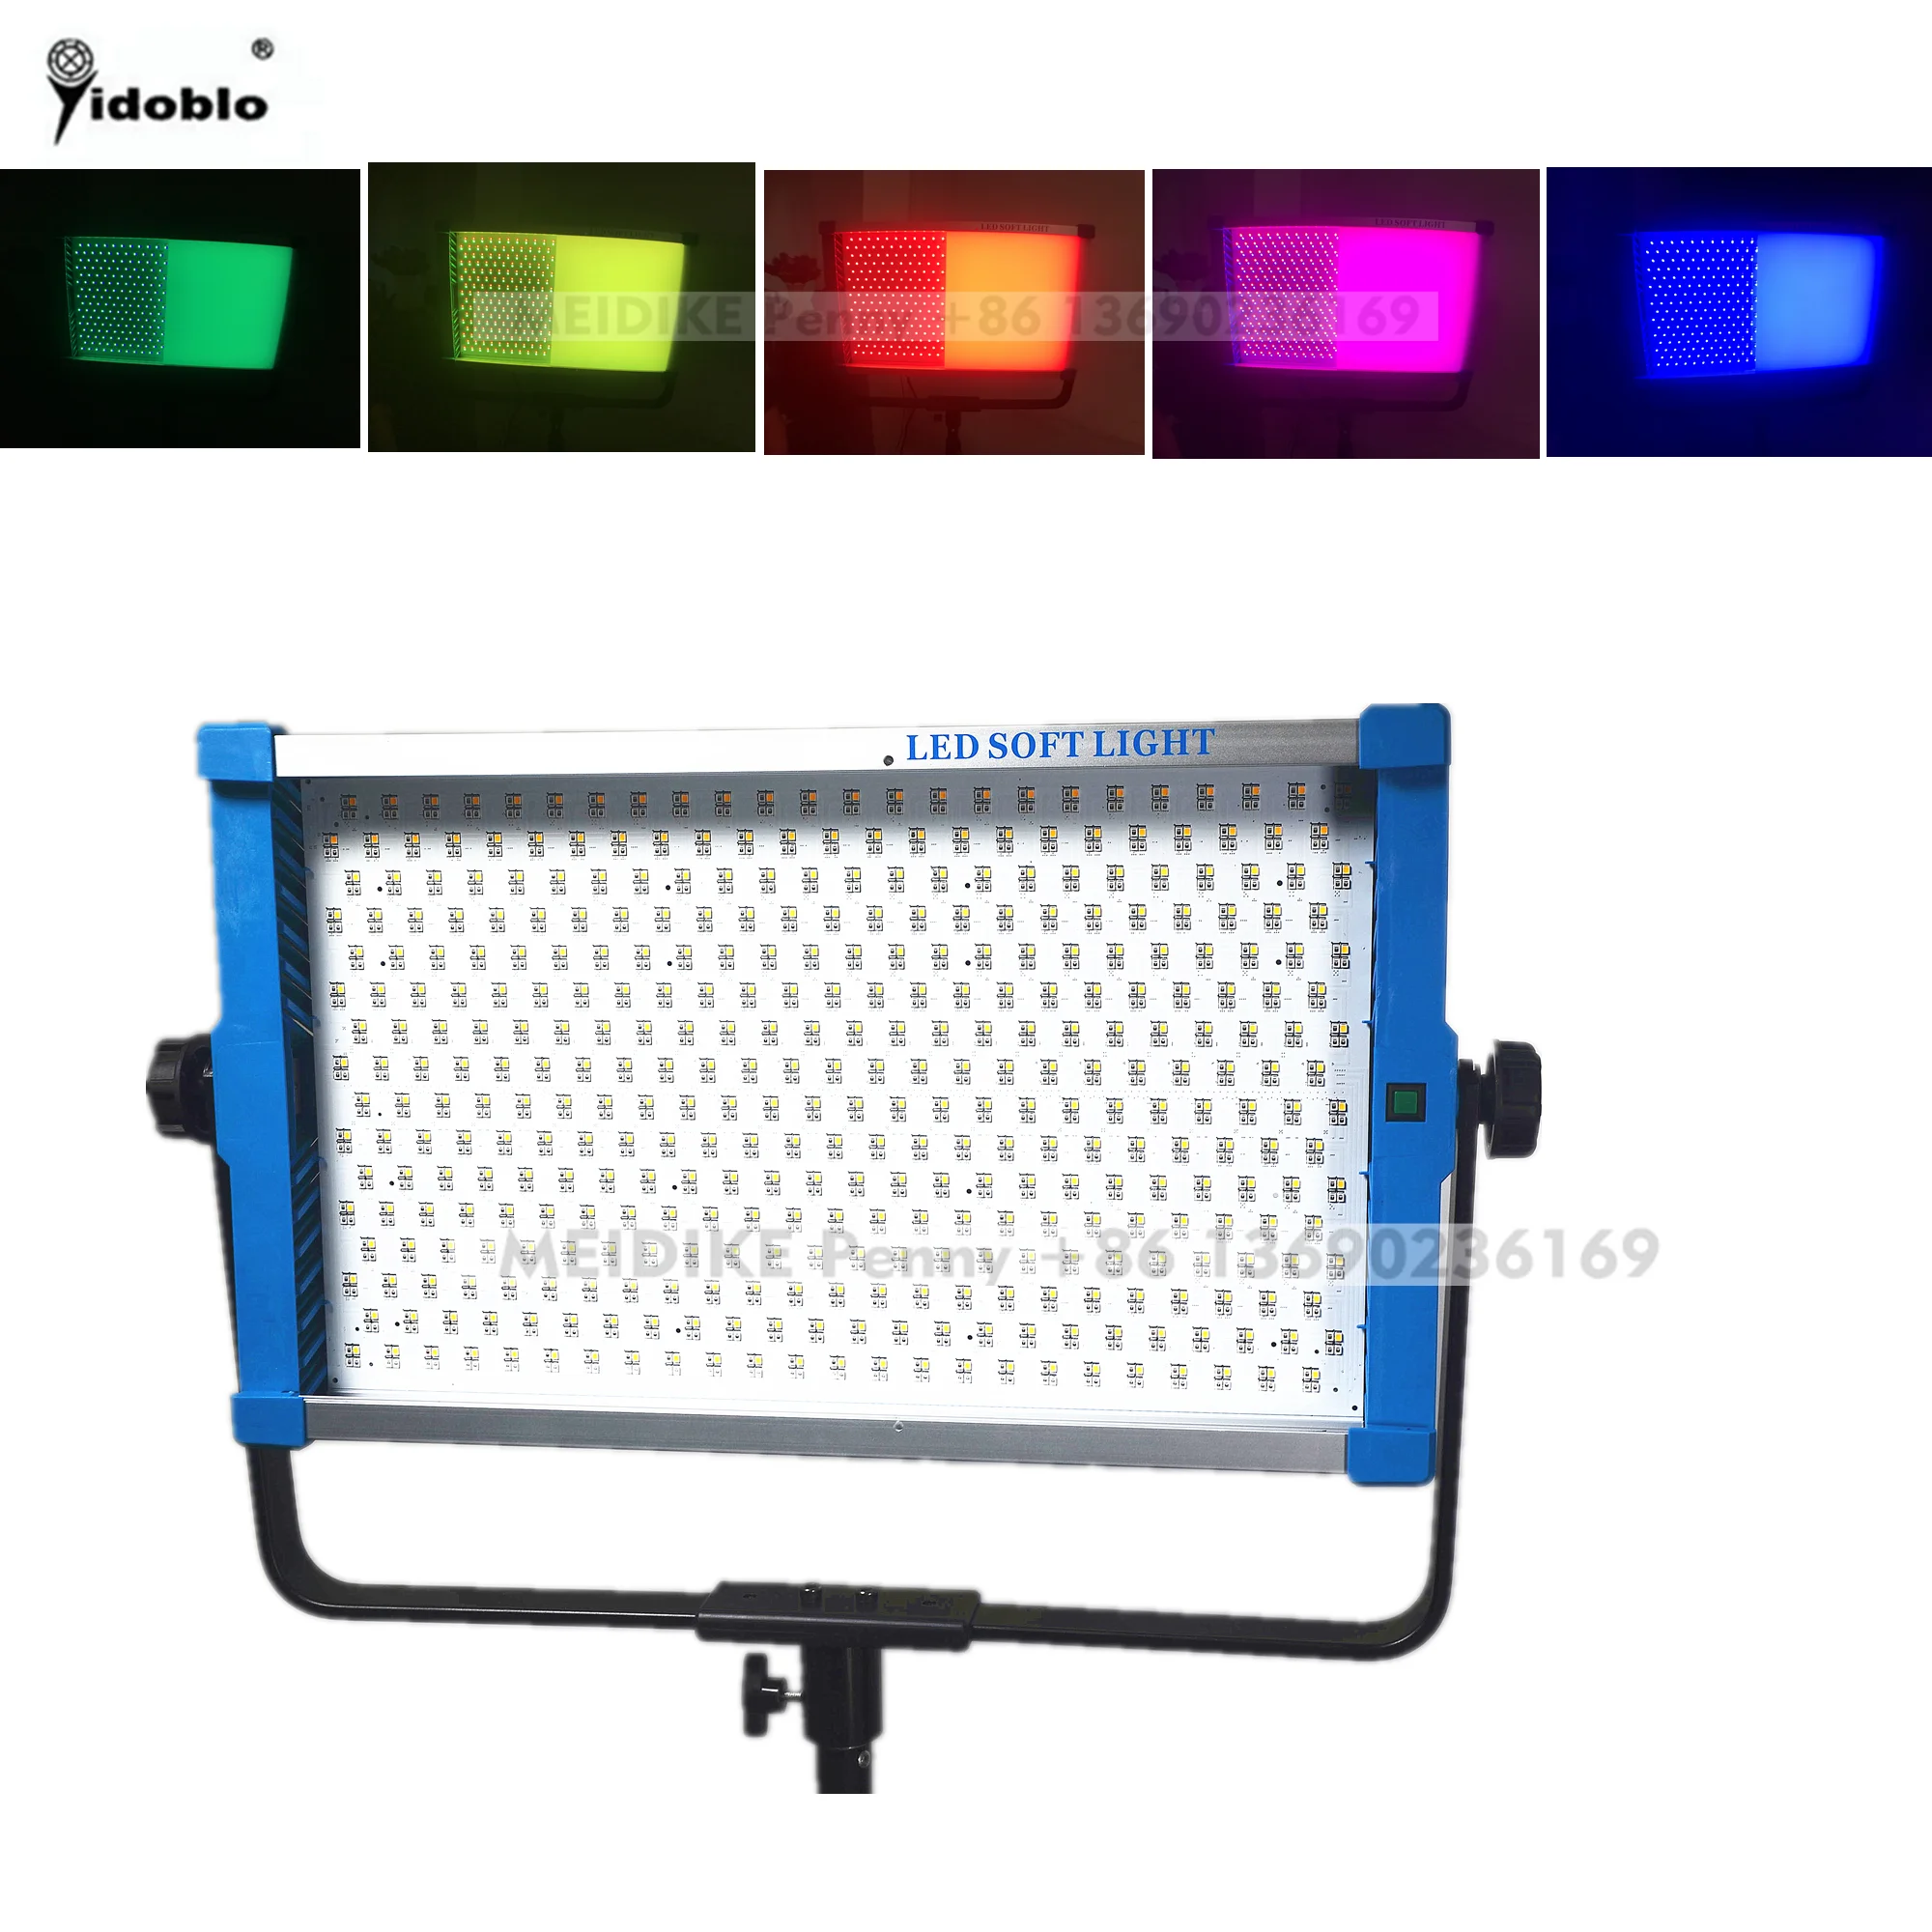 

Yidoblo A2200C RGB LED Panel Light with LCD screen useful led film light professional stage light equipment wedding accessories, Black blue